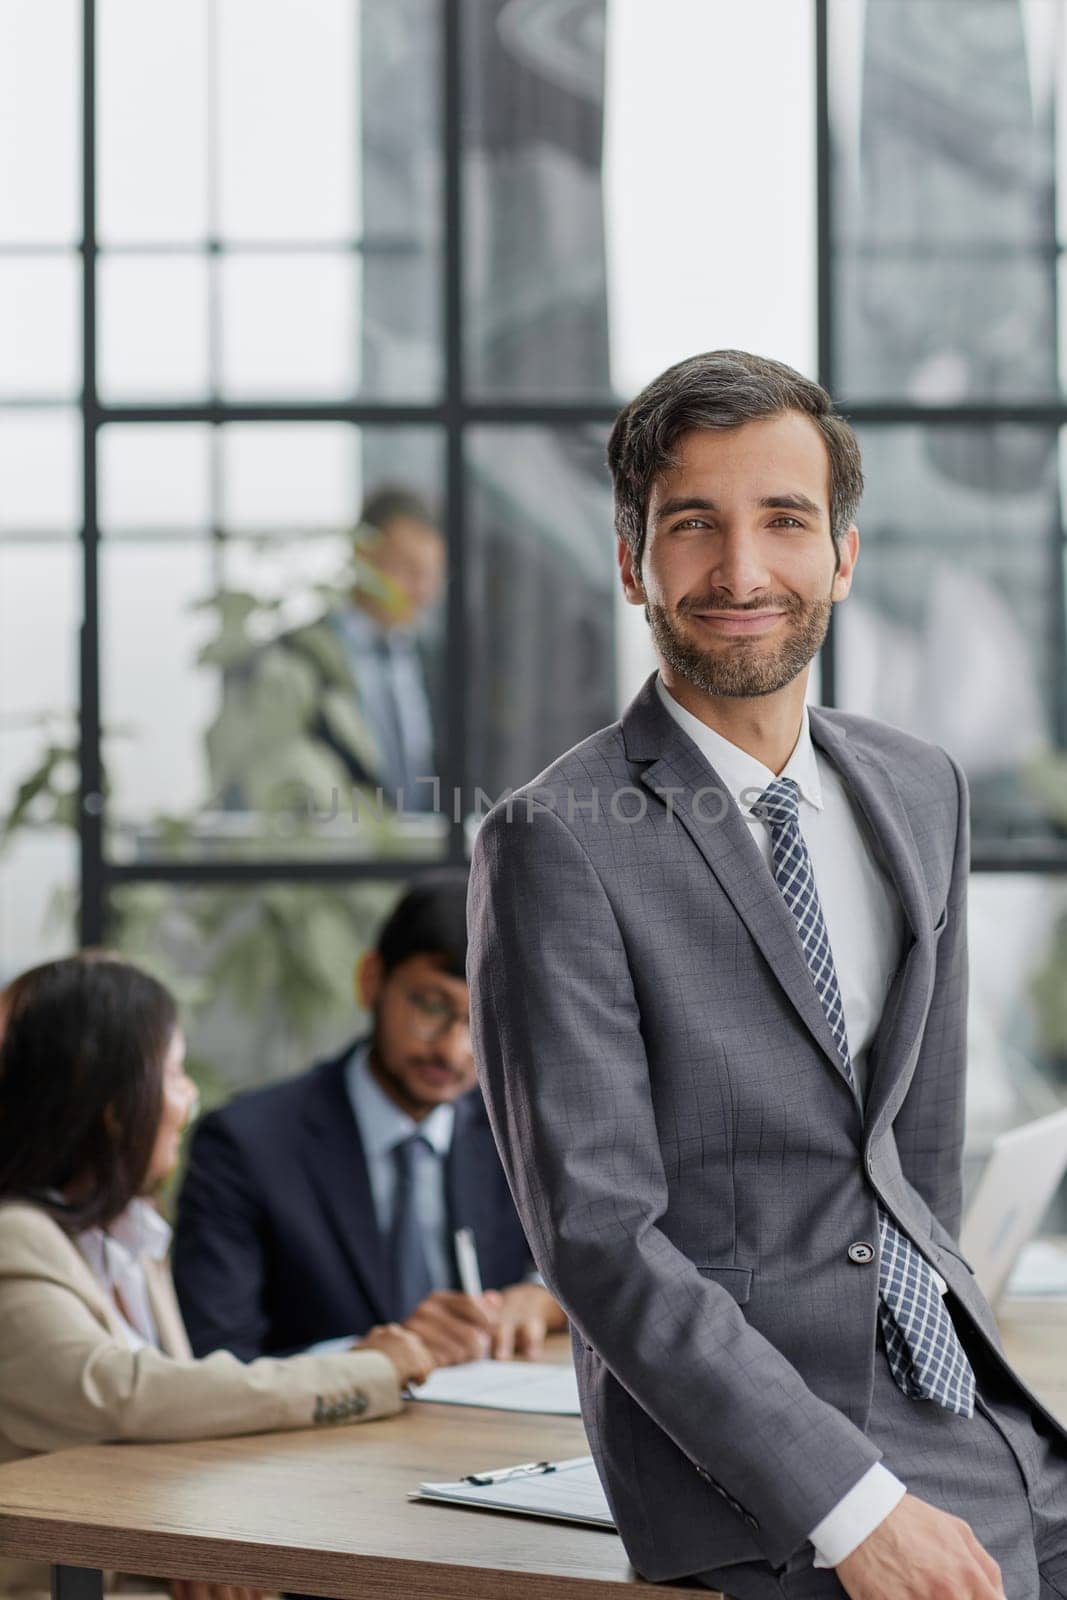 professional businessman, executive director of the company, sitting at the table in the office, with colleagues in the background